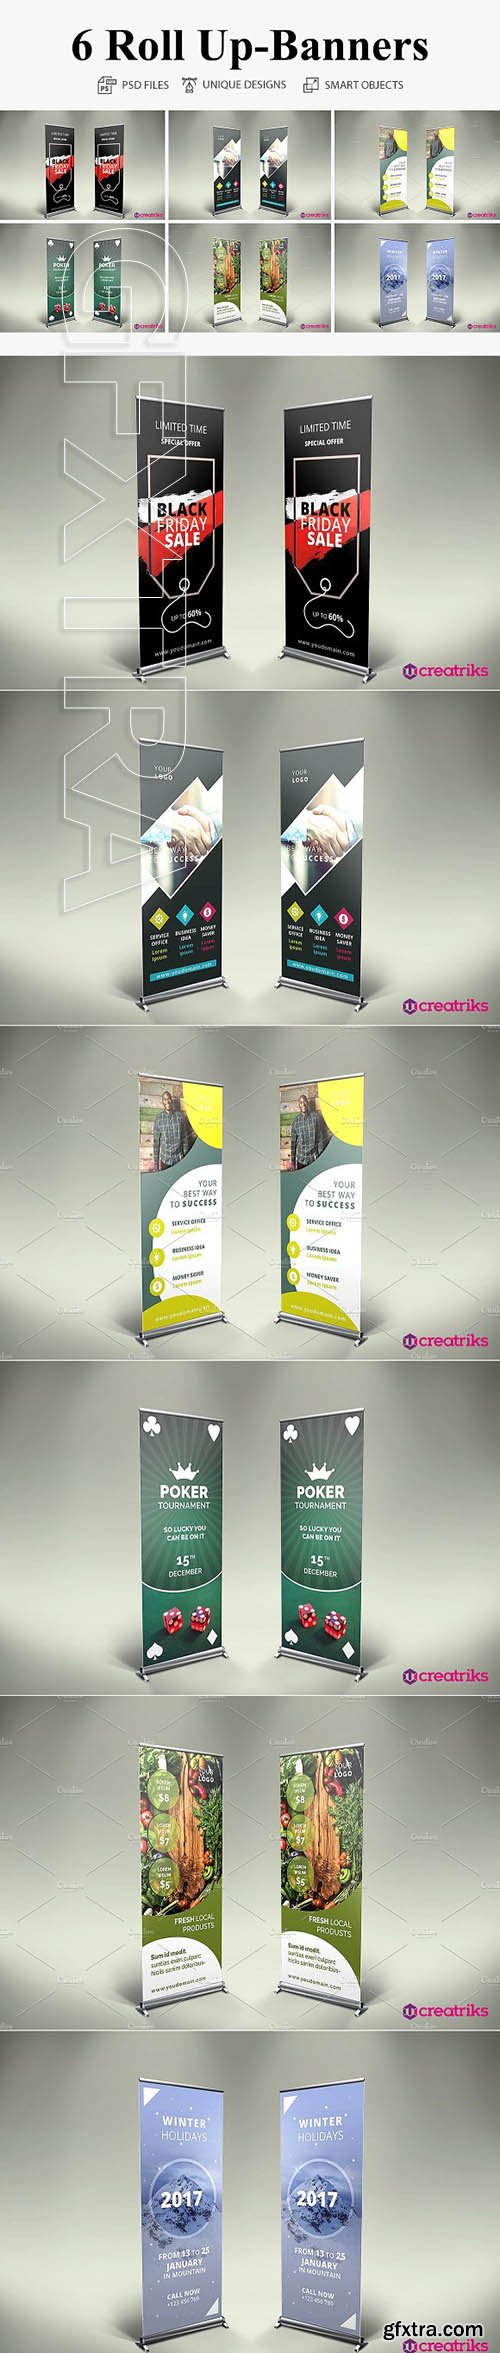 CreativeMarket - 6 Roll Up Banners 2912752